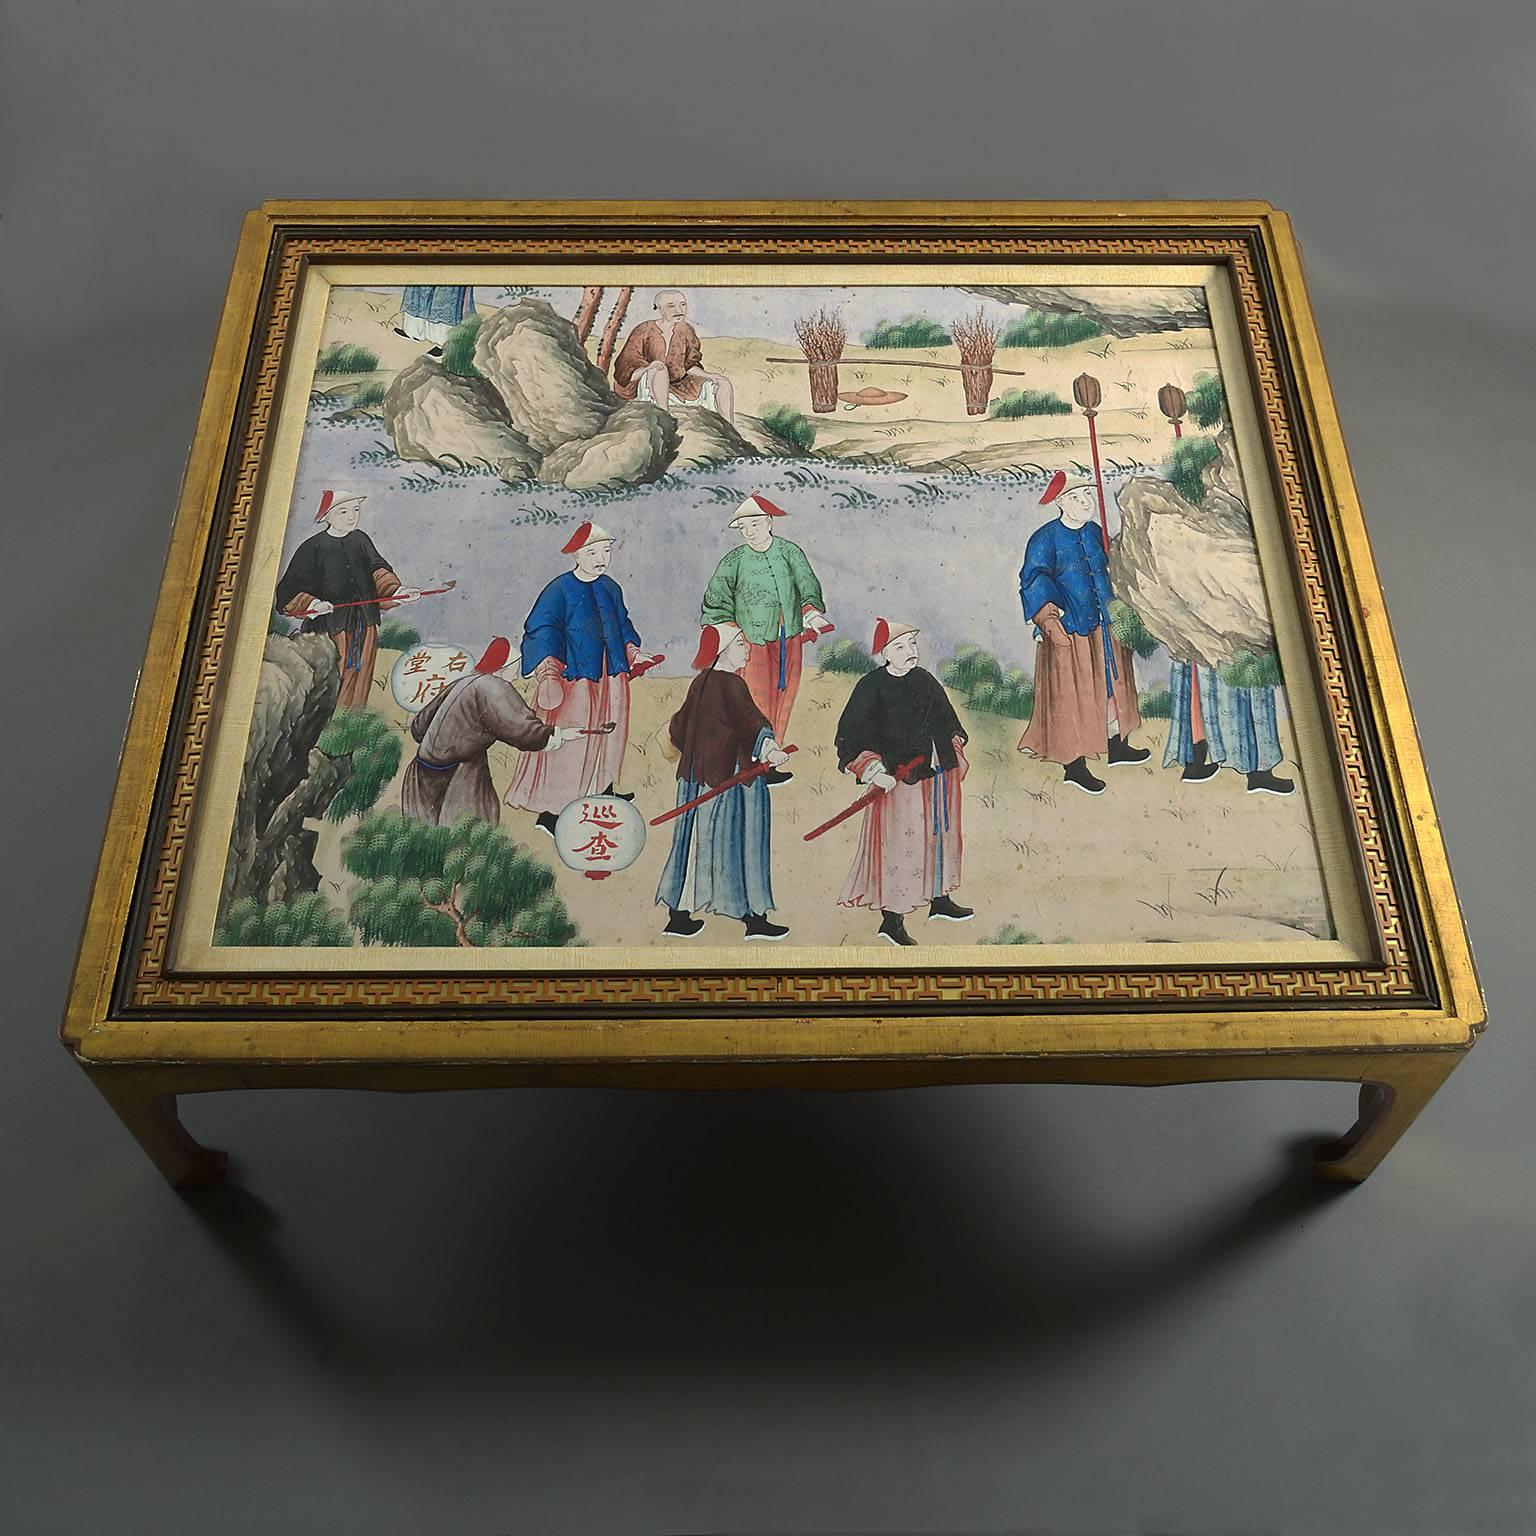 An unusual pair of low tables the tops formed from a pair of late 18th century watercolour and gouache Chinese paintings. One depicting a sedan chair outside a temple with attendants, the other depicting attendants, some armed, in a garden with